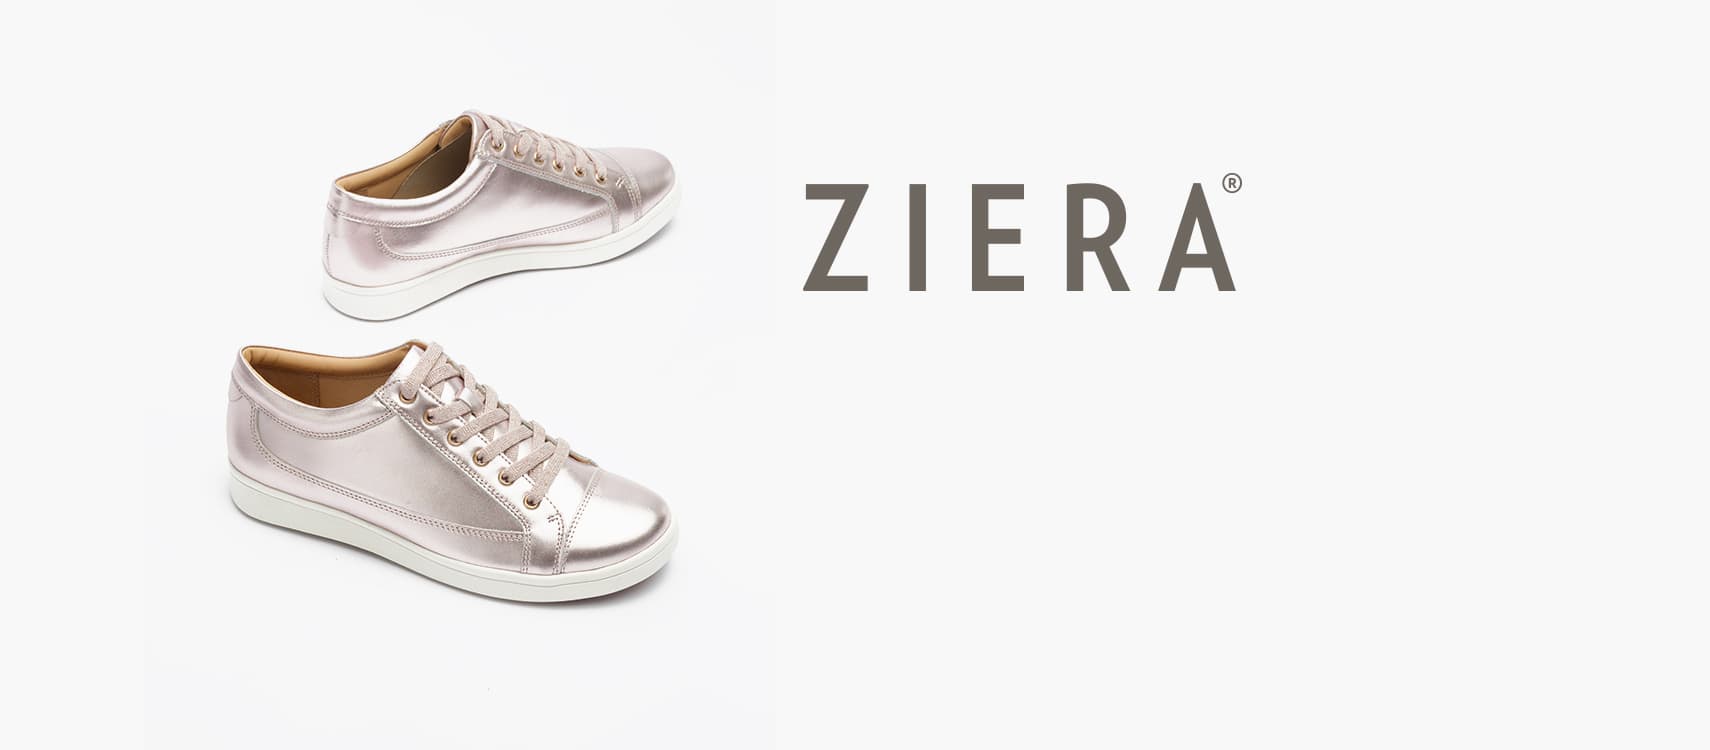 UPDATE ON ADMINISTRATION OF ZIERA SHOES - Apparel